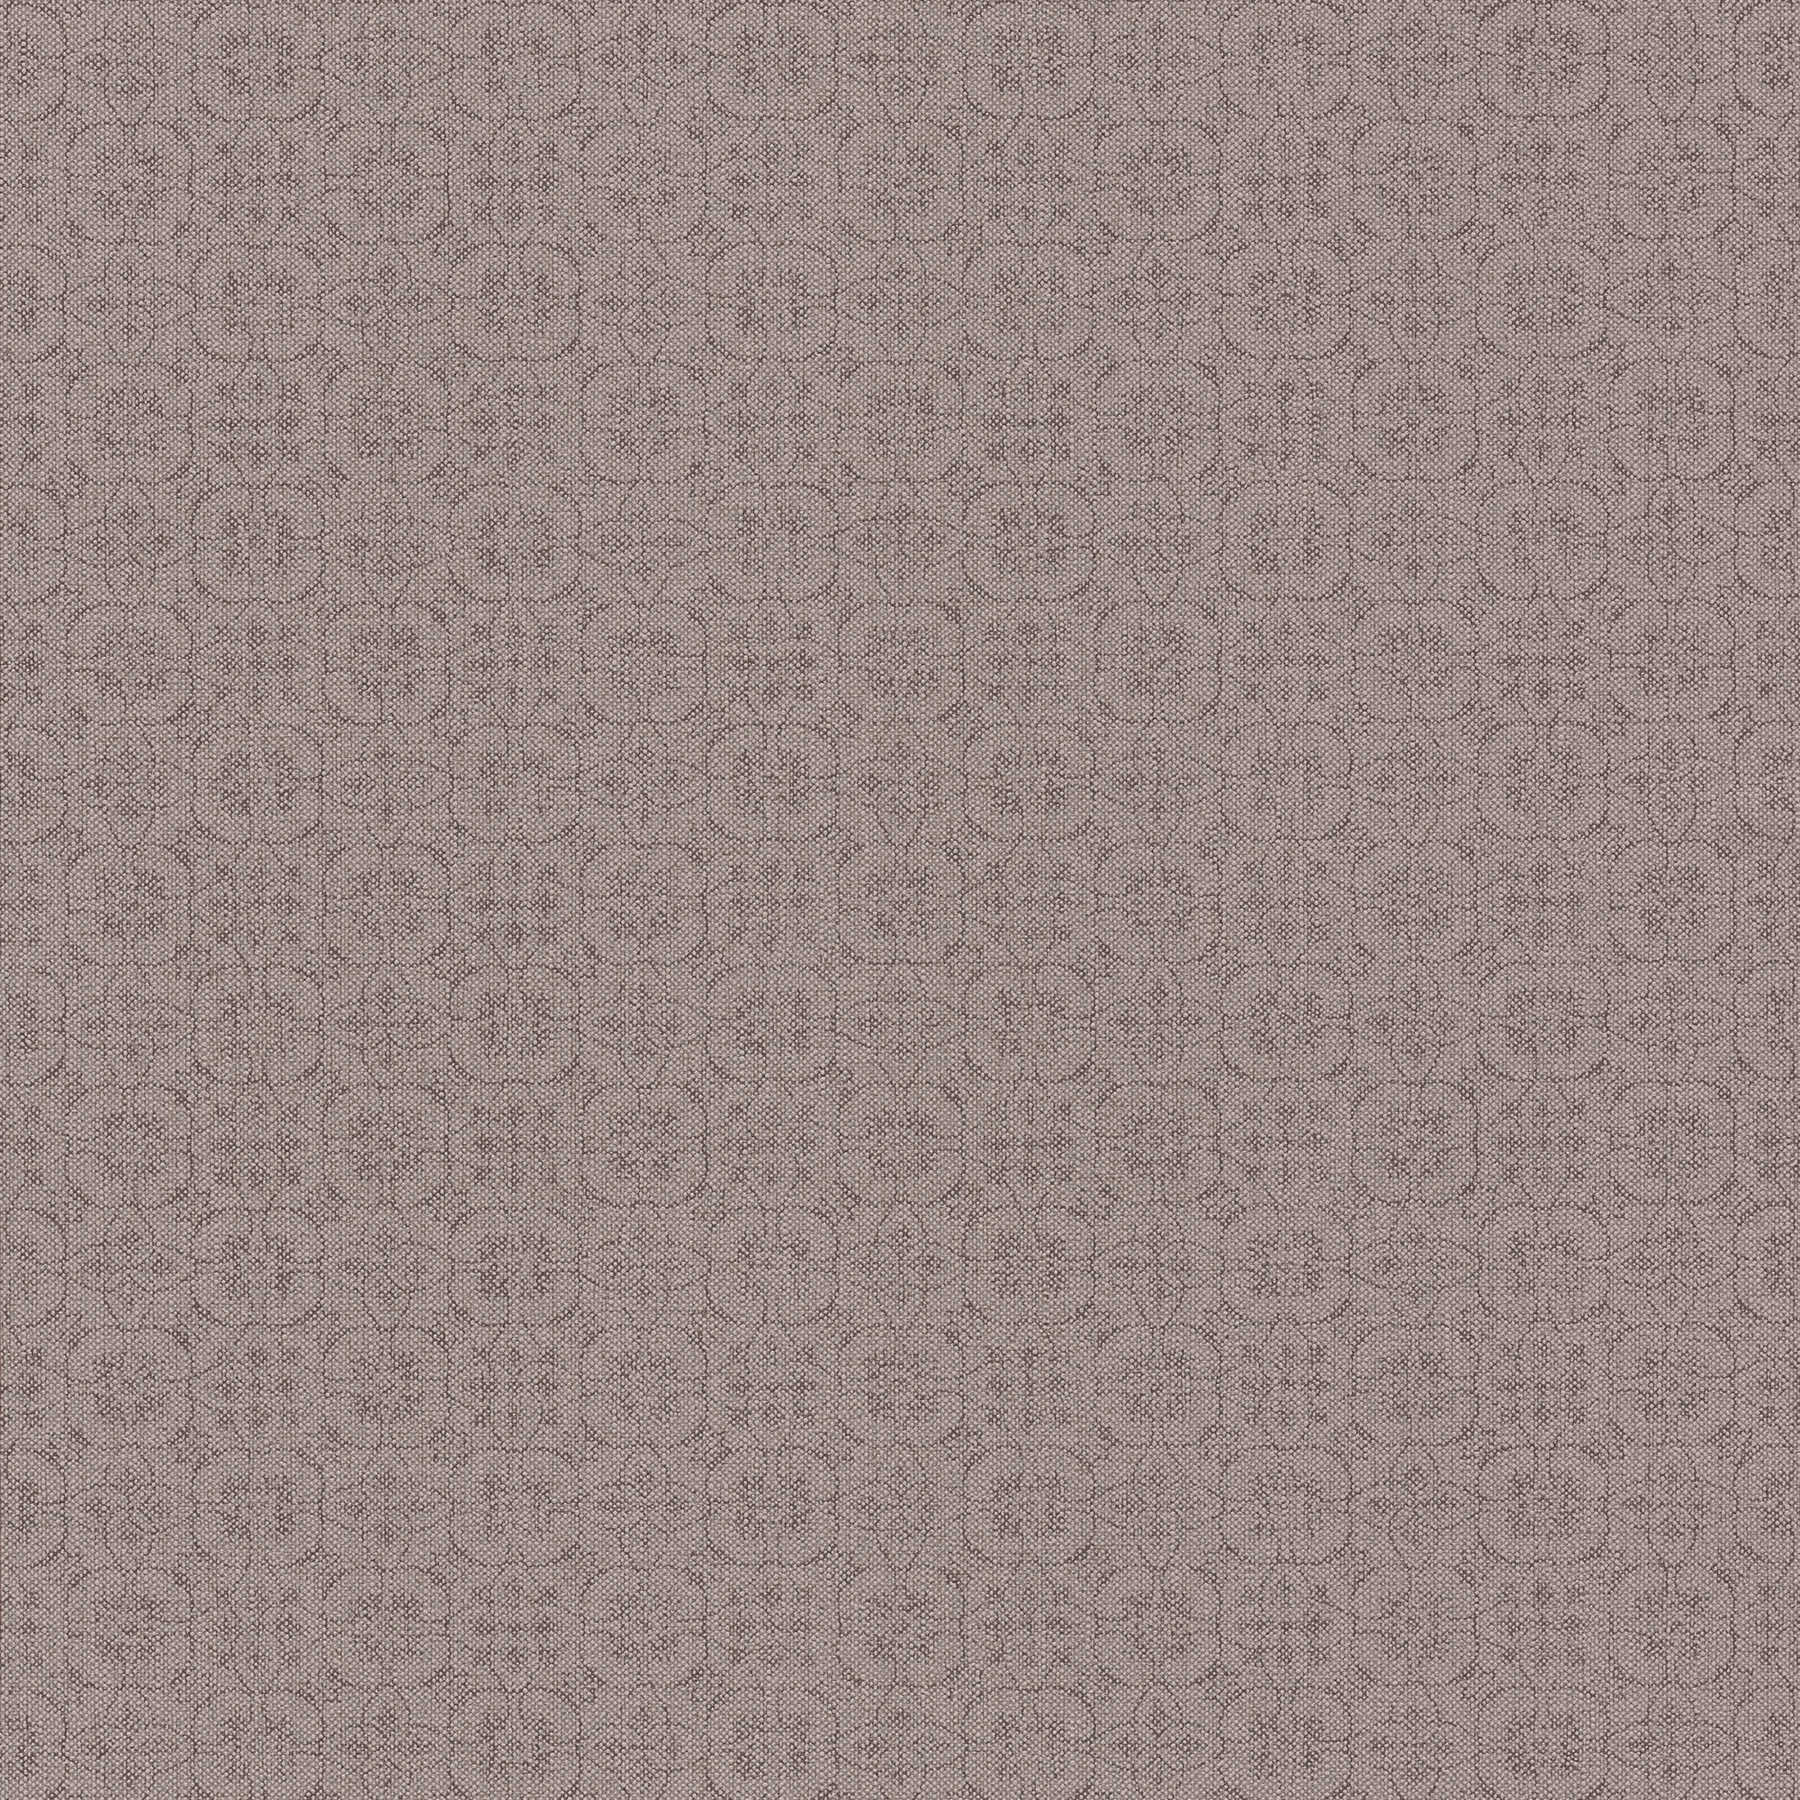 Linen look non-woven wallpaper with vintage pattern - brown
